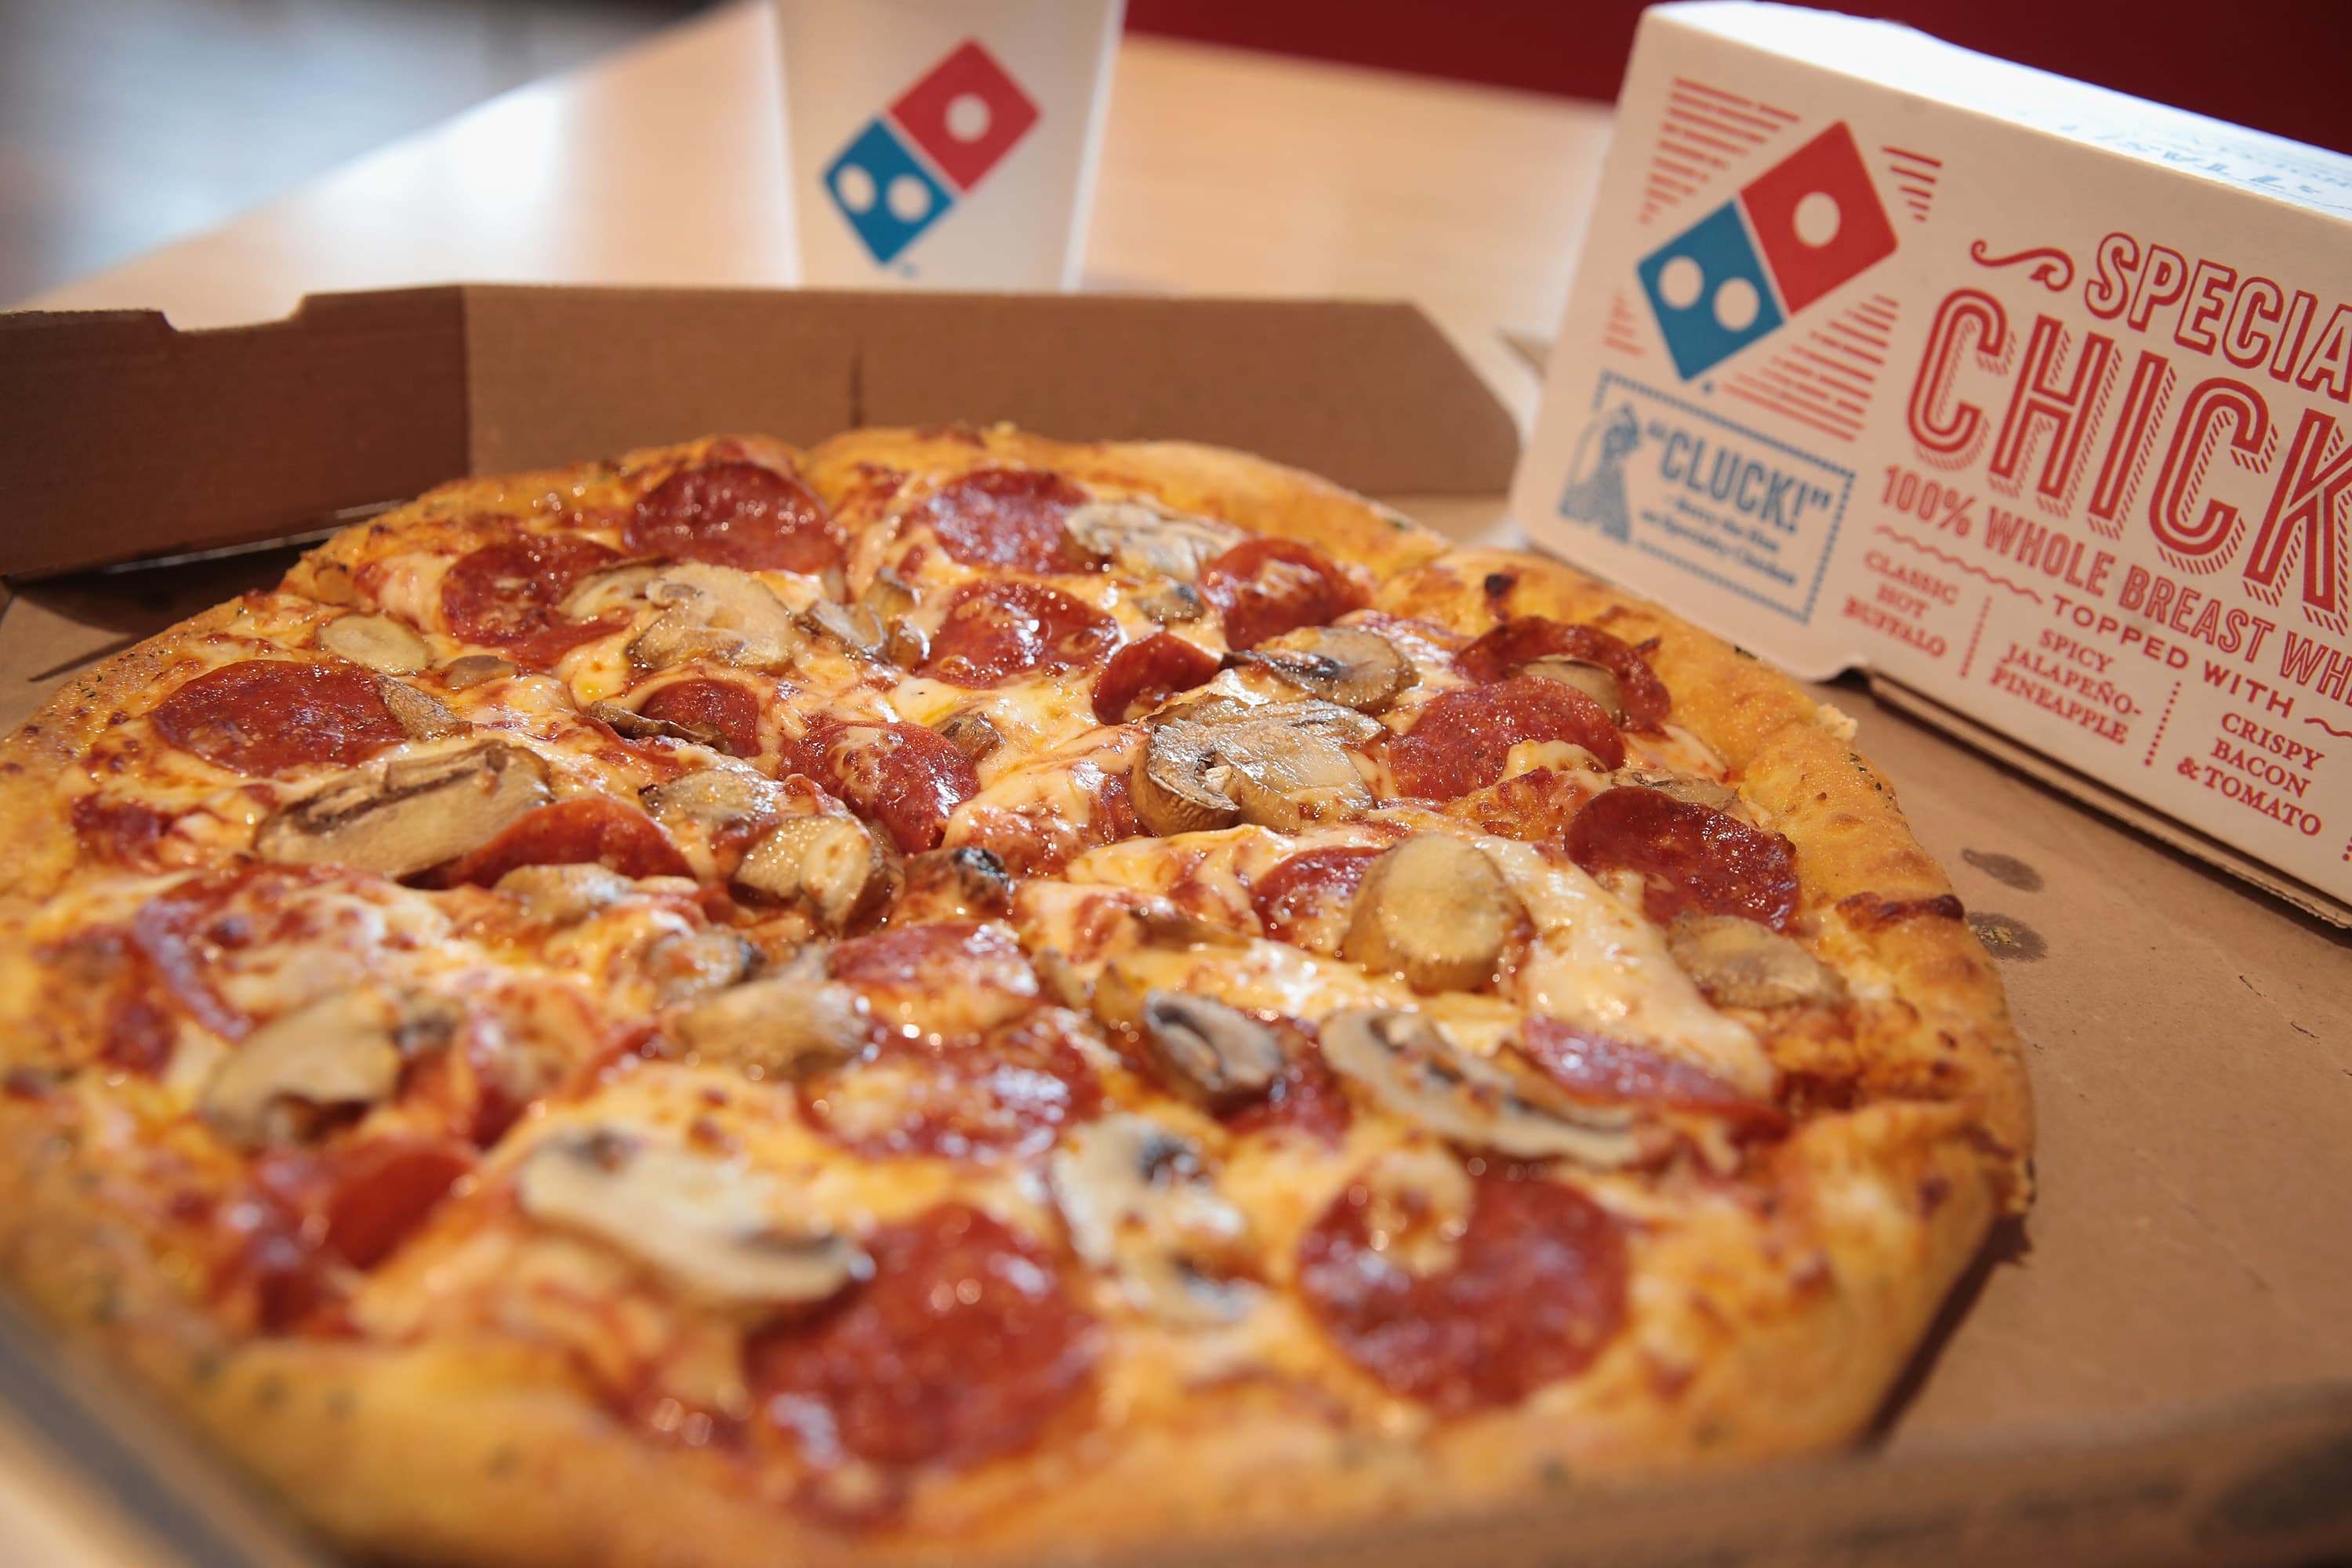 Fertile clothing neck Domino's stock yields higher returns than Google since IPOs